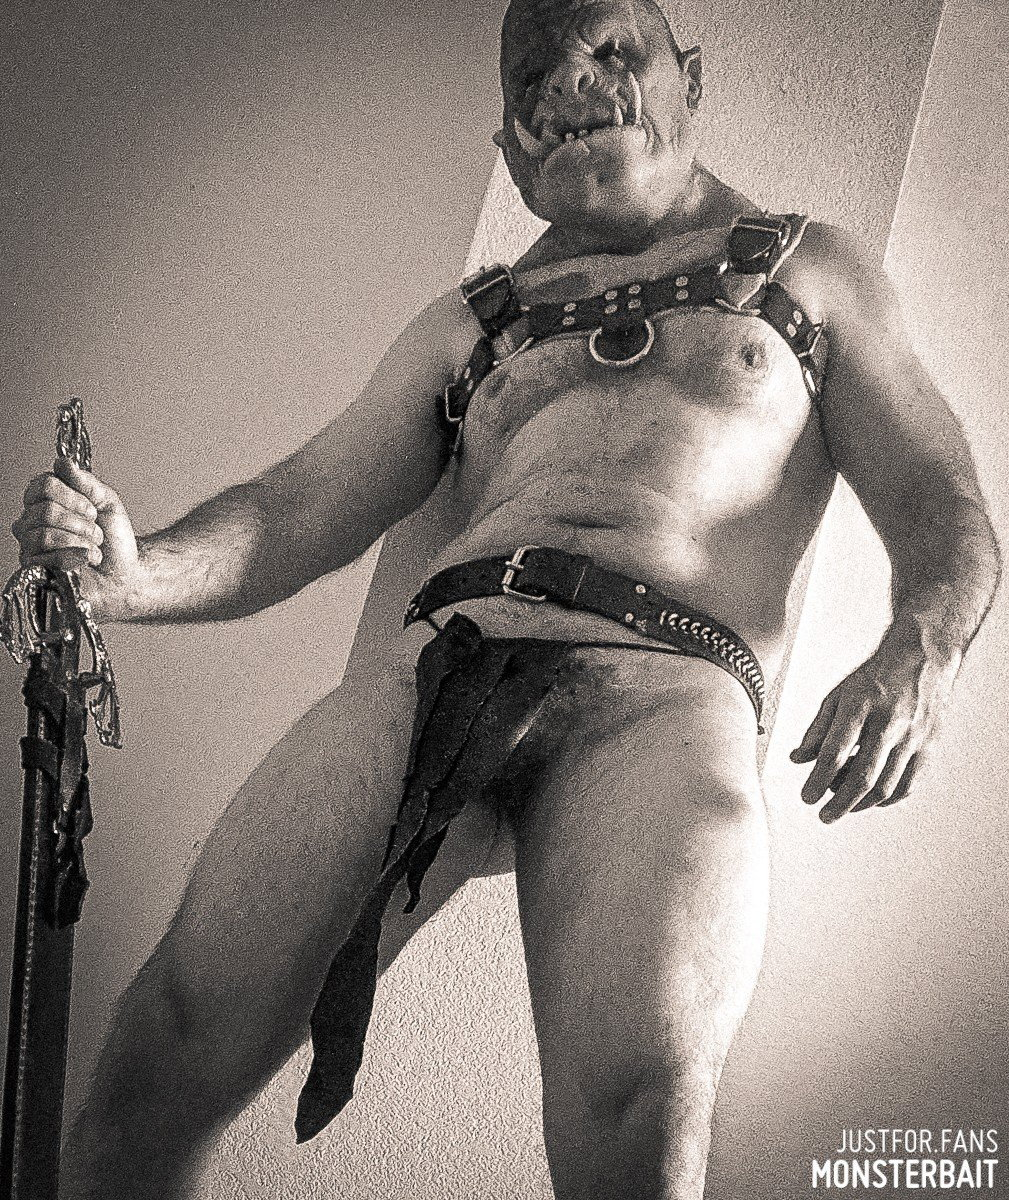 Watch the Photo by Monsterbait with the username @Monsterbait, who is a star user, posted on March 28, 2022. The post is about the topic GayExTumblr. and the text says 'Orc me daddy! 
More shots up for subscribers! 

#orc #ogre #monster #ork #mask #men #male #gay #man #pinup #leather #kink #fetish #cosplay #warrior #barbarian'